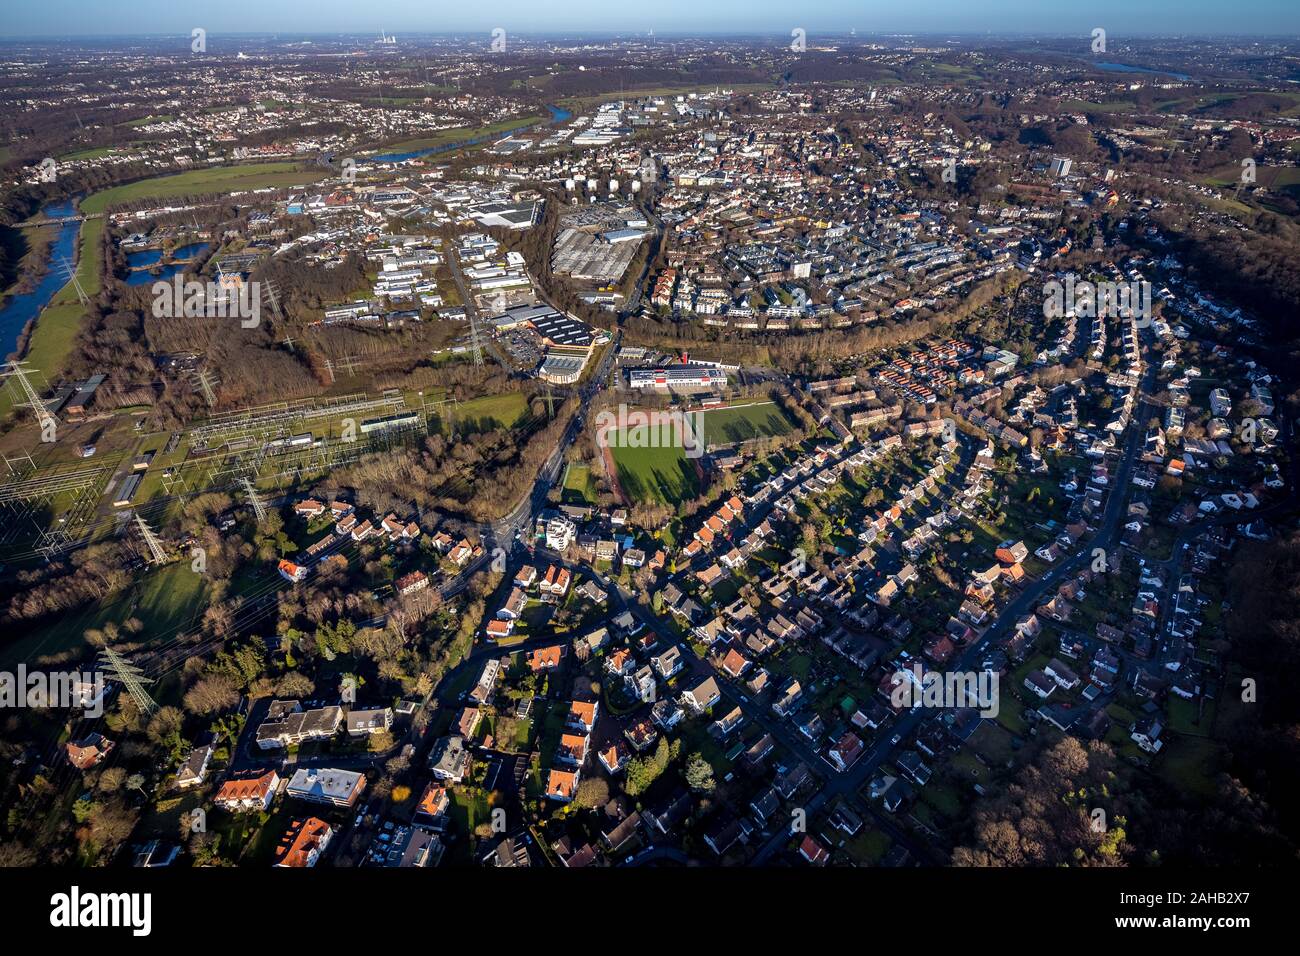 Aerial view, city view and inner city area Hattingen, river Ruhr, Hattingen, Ennepe-Ruhr district, Ruhr area, North Rhine-Westphalia, Germany, DE, Eur Stock Photo